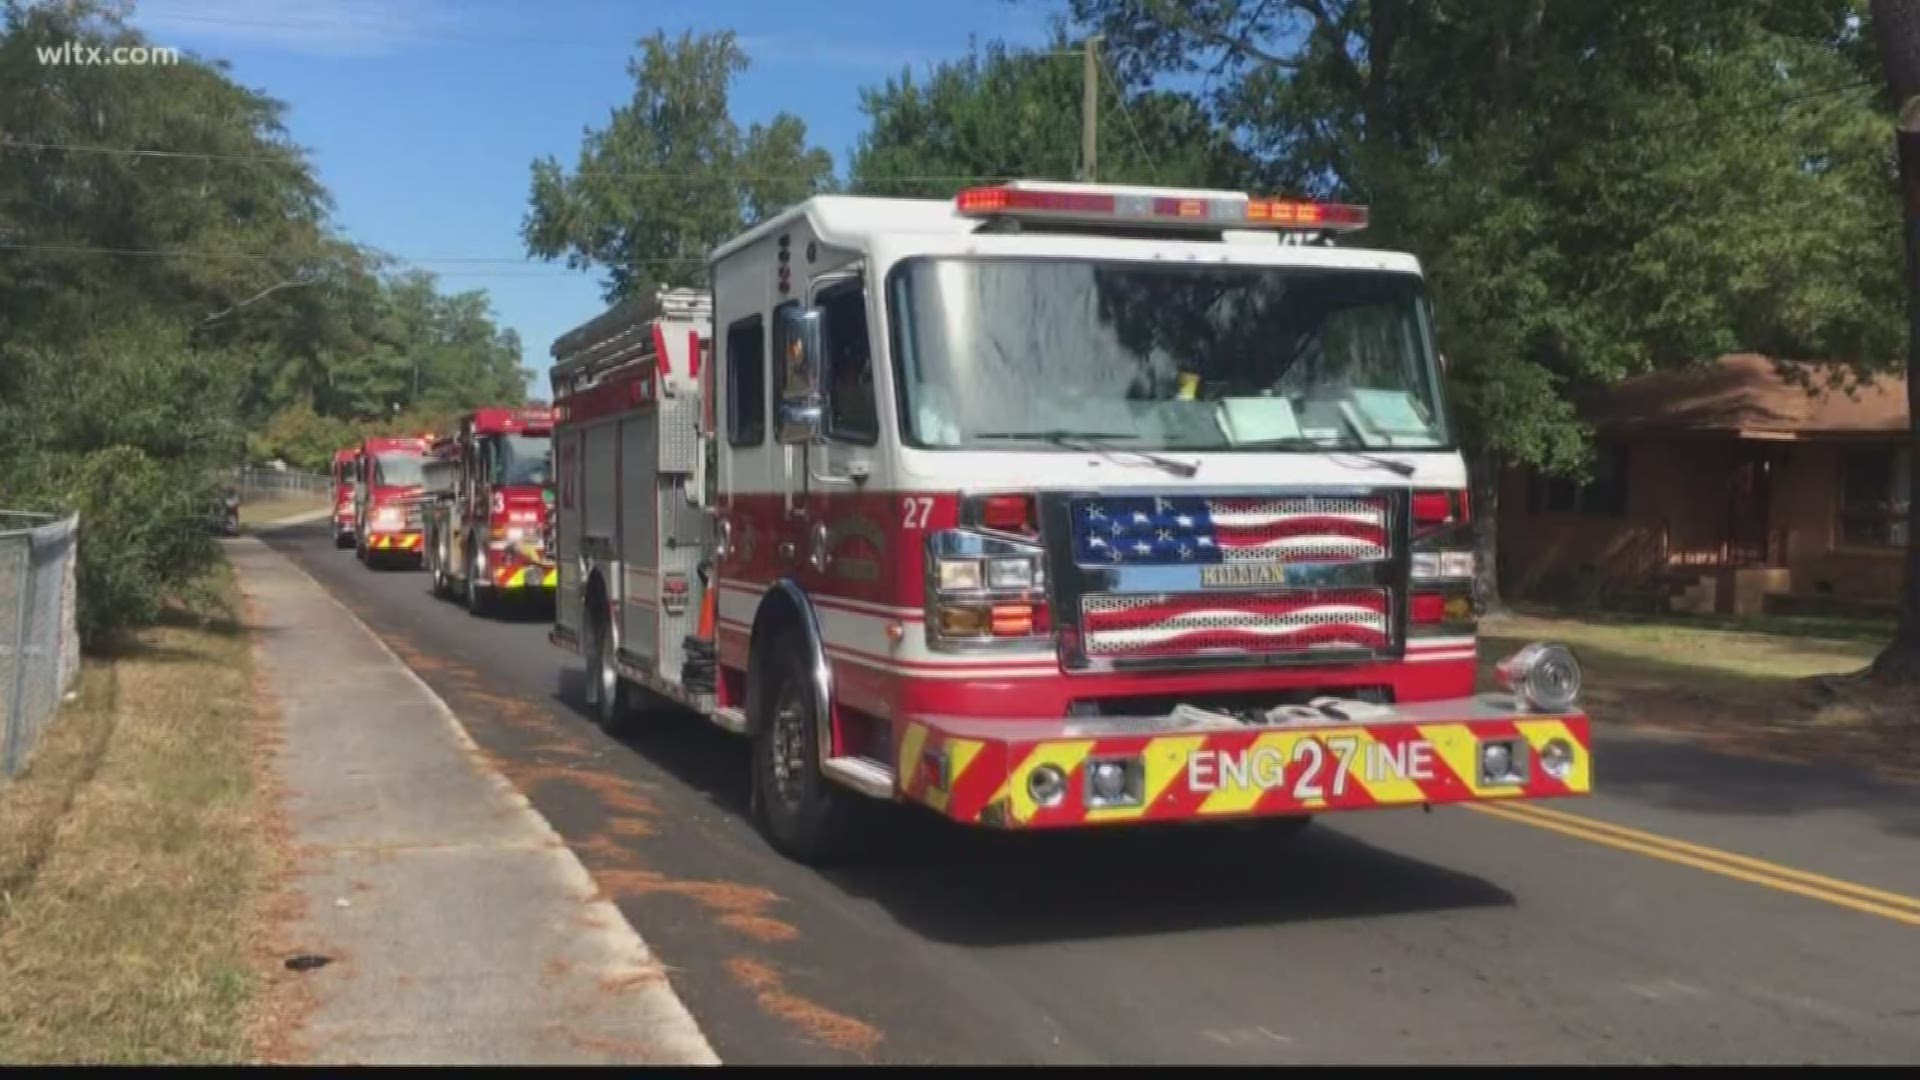 The annual Fire Prevention Parade brought multiple fire trucks to a Columbia neighborhood along with information to help keep locals safe. Kayland Hagwood reports.